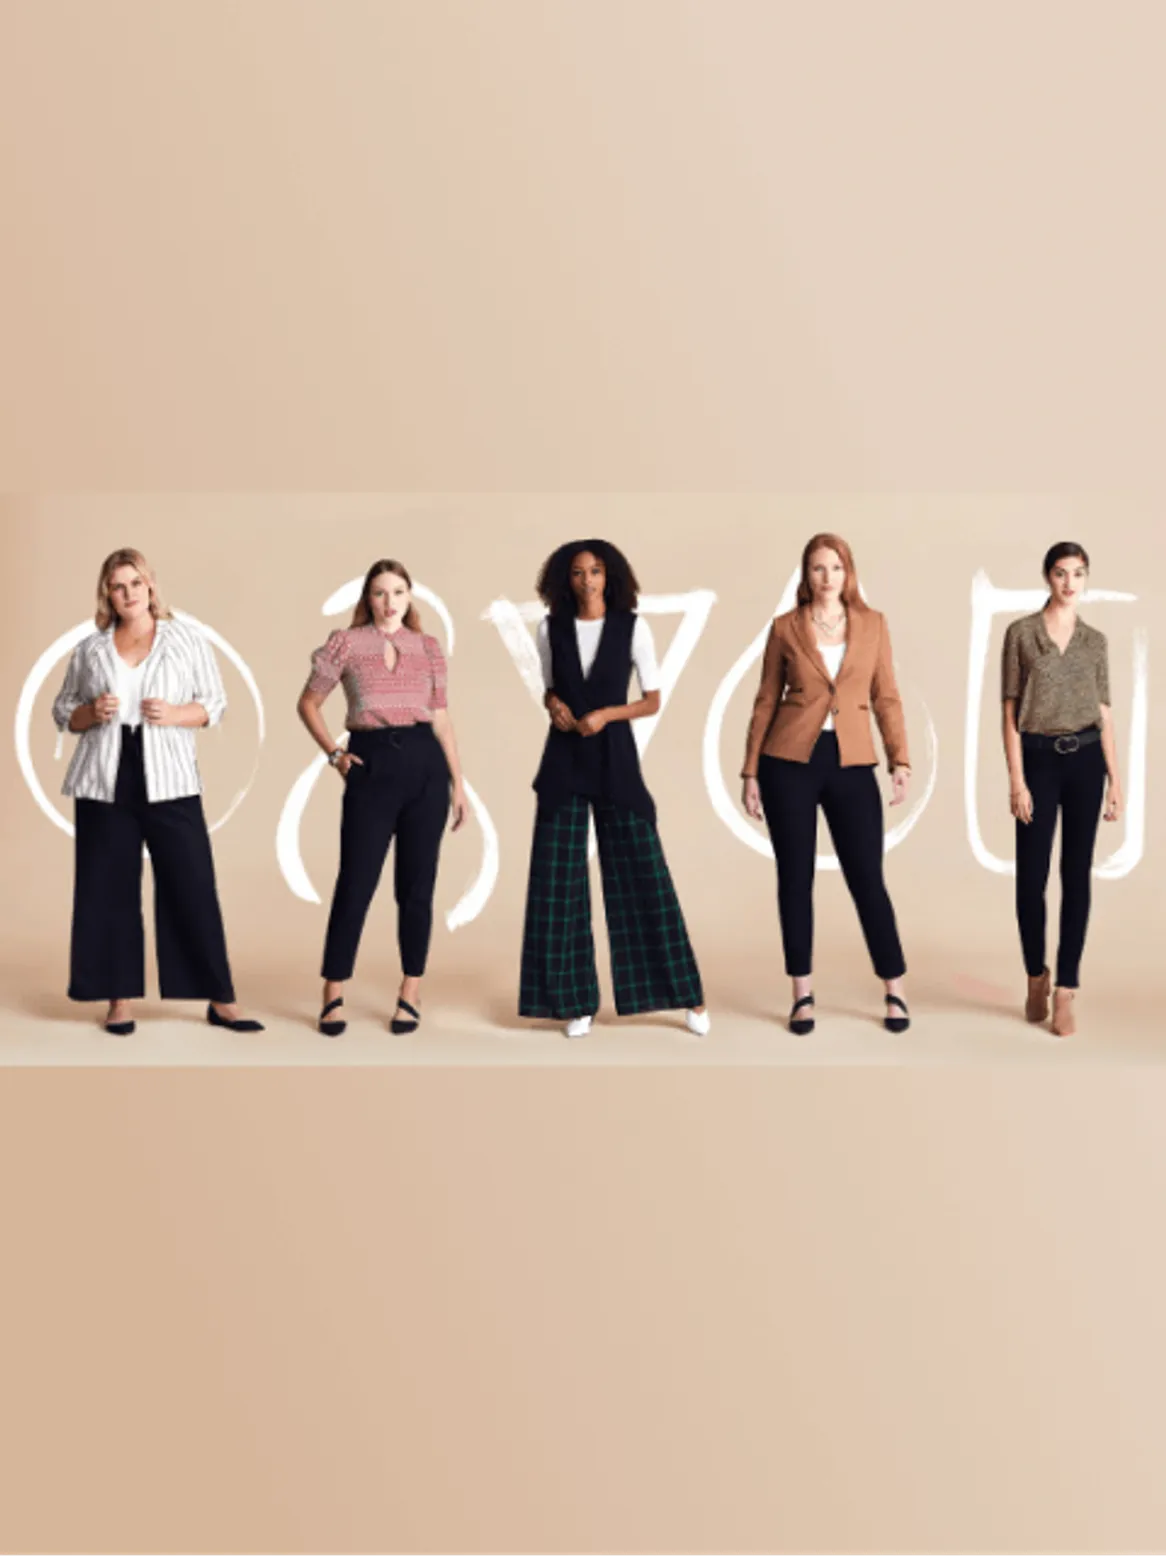 Explore female Kibbe body types with LookSky to find your unique fashion style, featuring examples of Romantics, Naturals, and Dramatics to guide your personalized clothing selection.